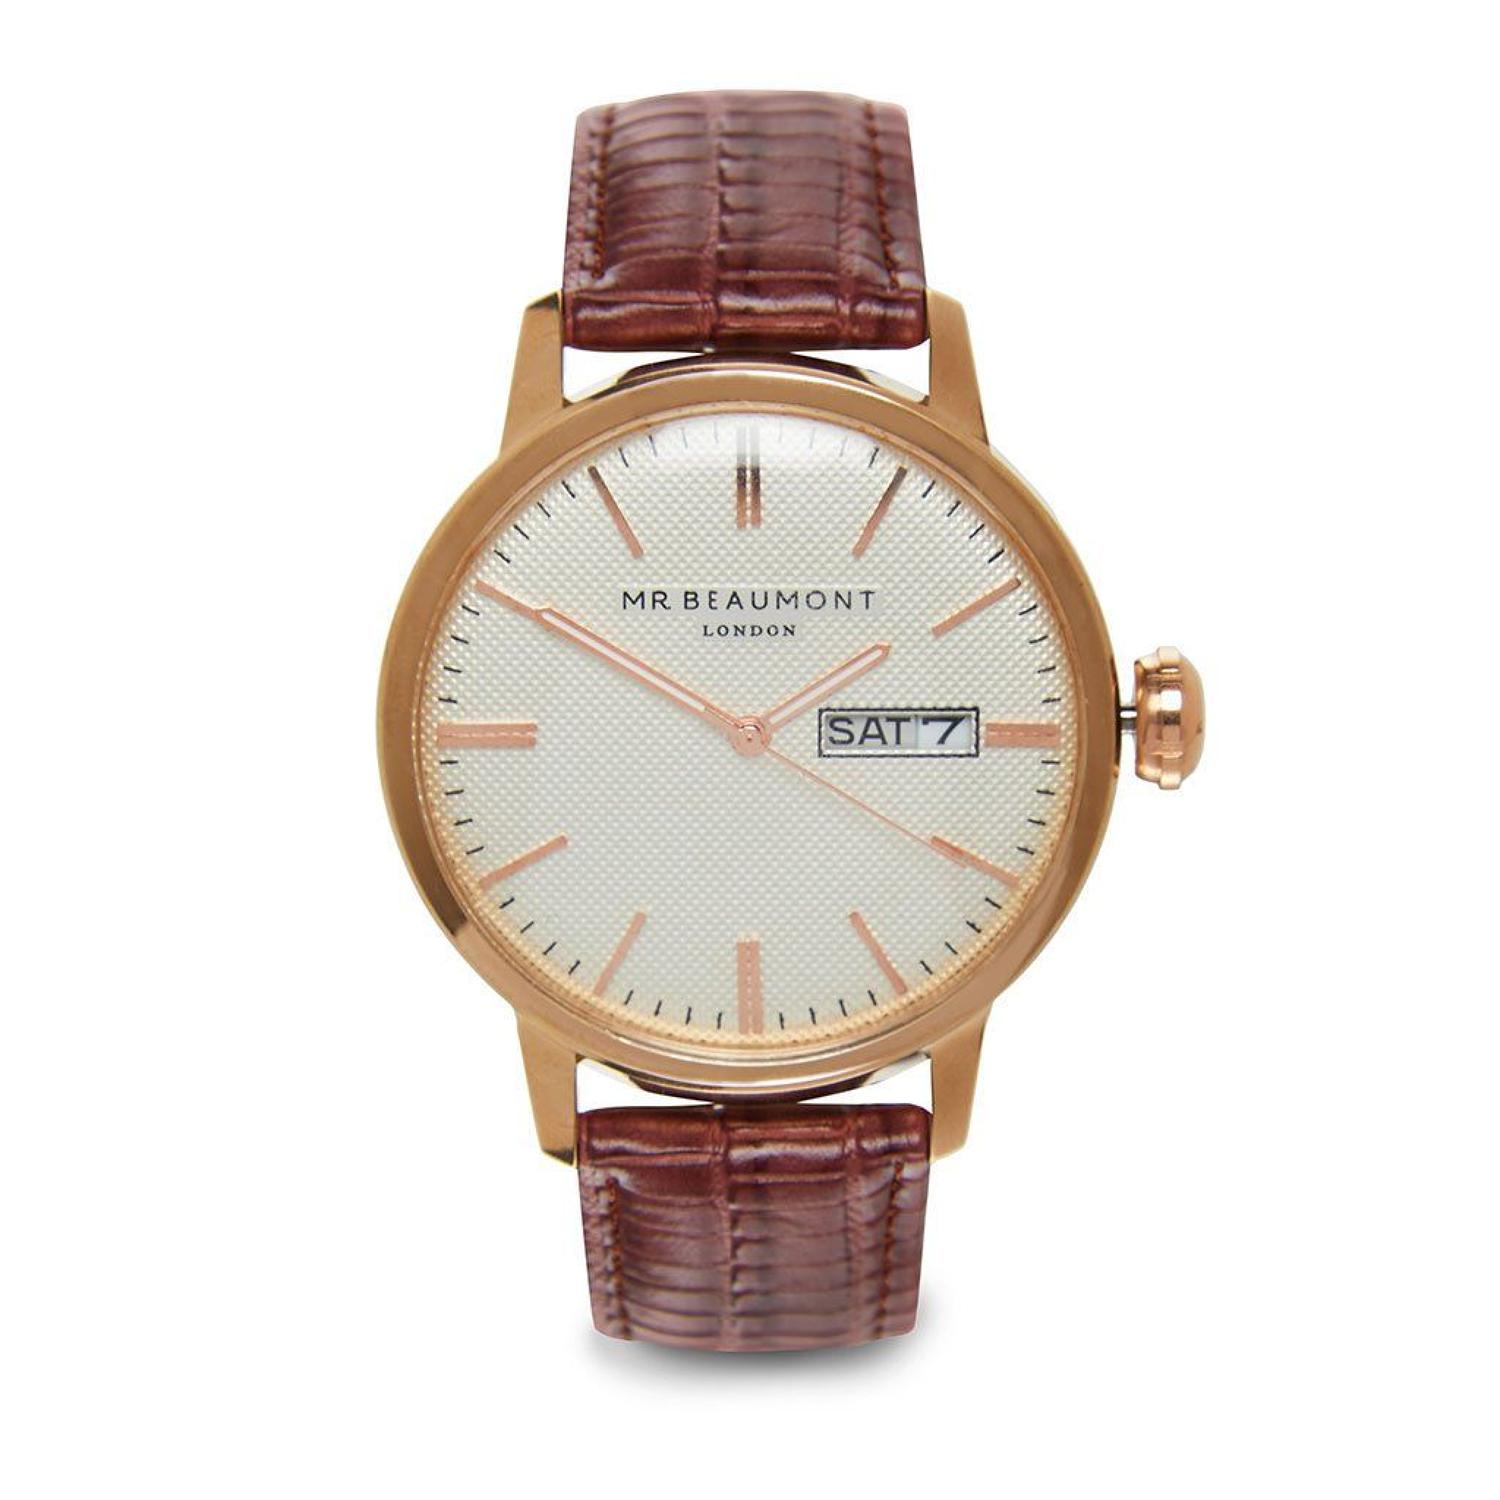 Mr Beaumont - Vintage - Brown/white dial